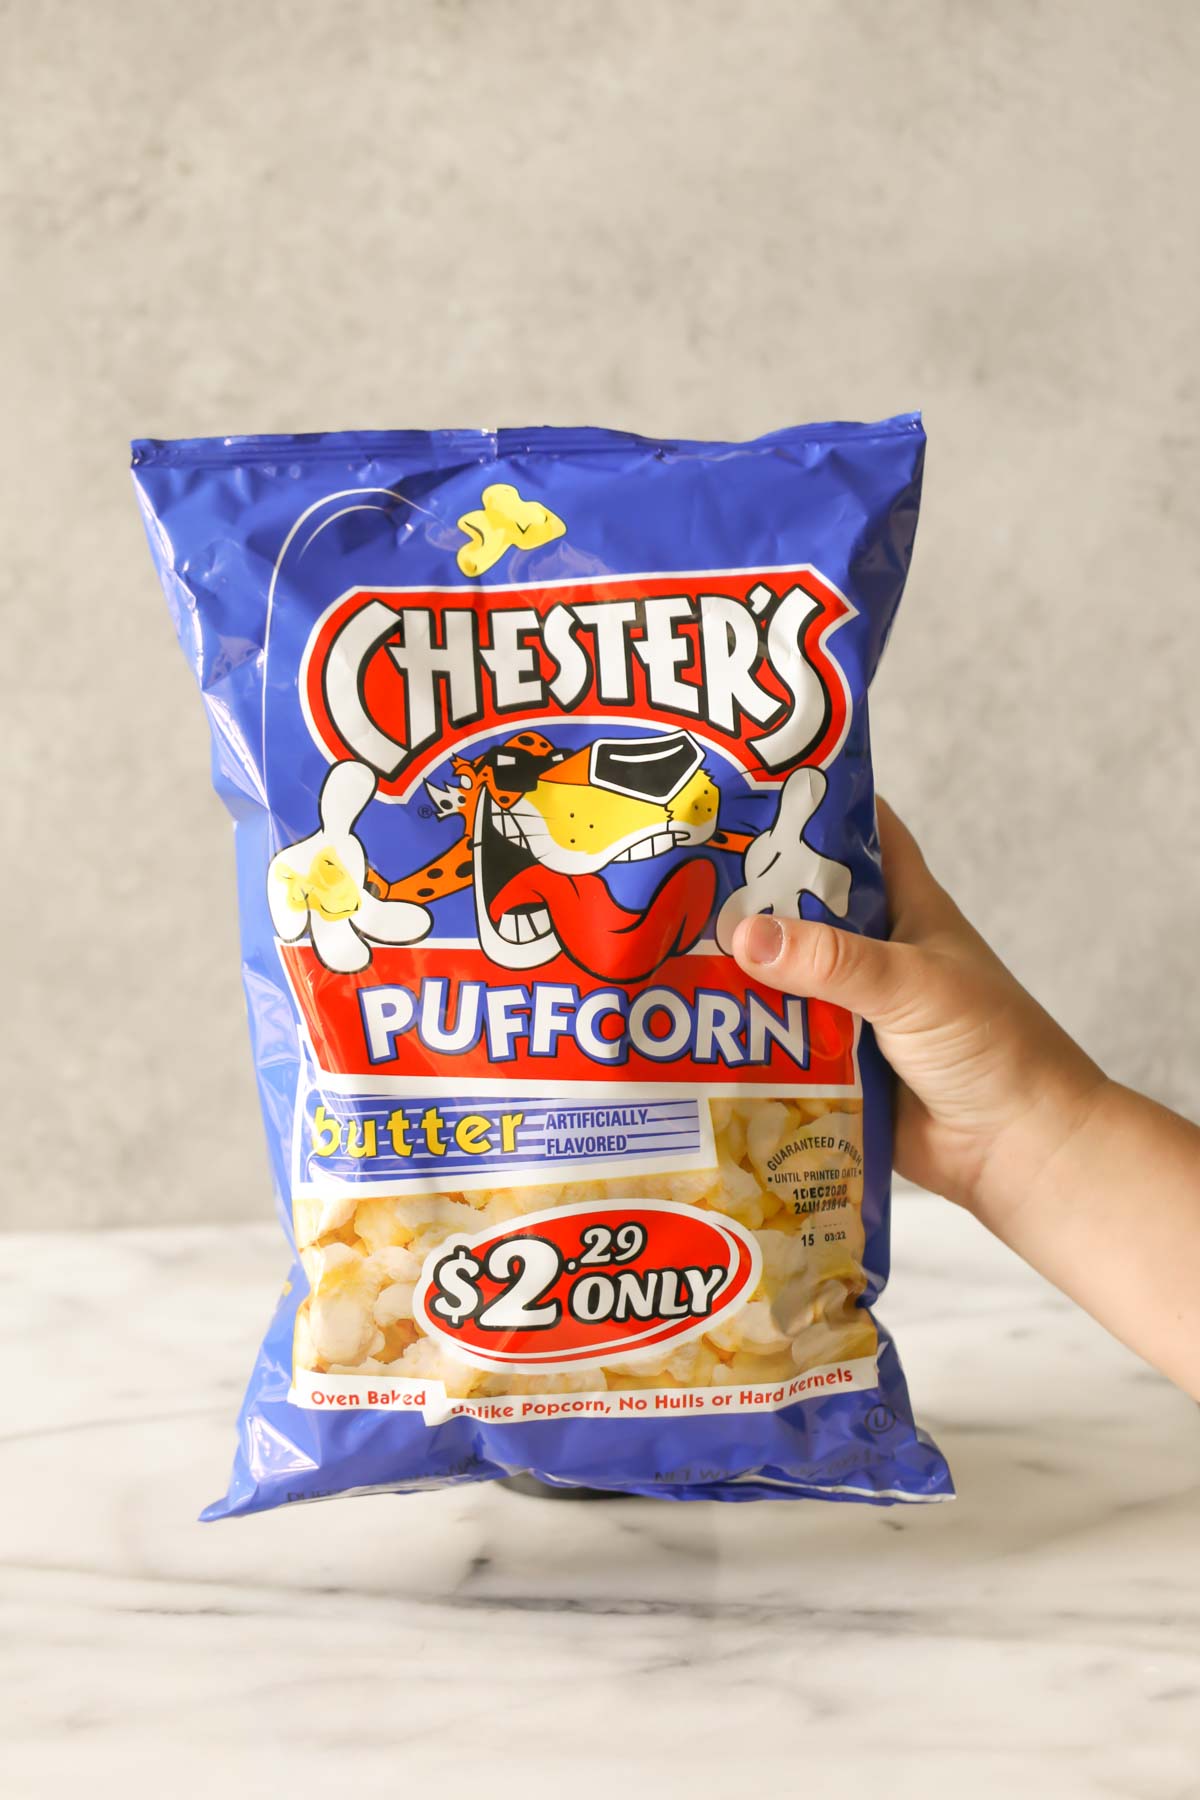 A bag of Chester's Puffcorn butter flavored - used in the Caramel Puff Corn recipe.  